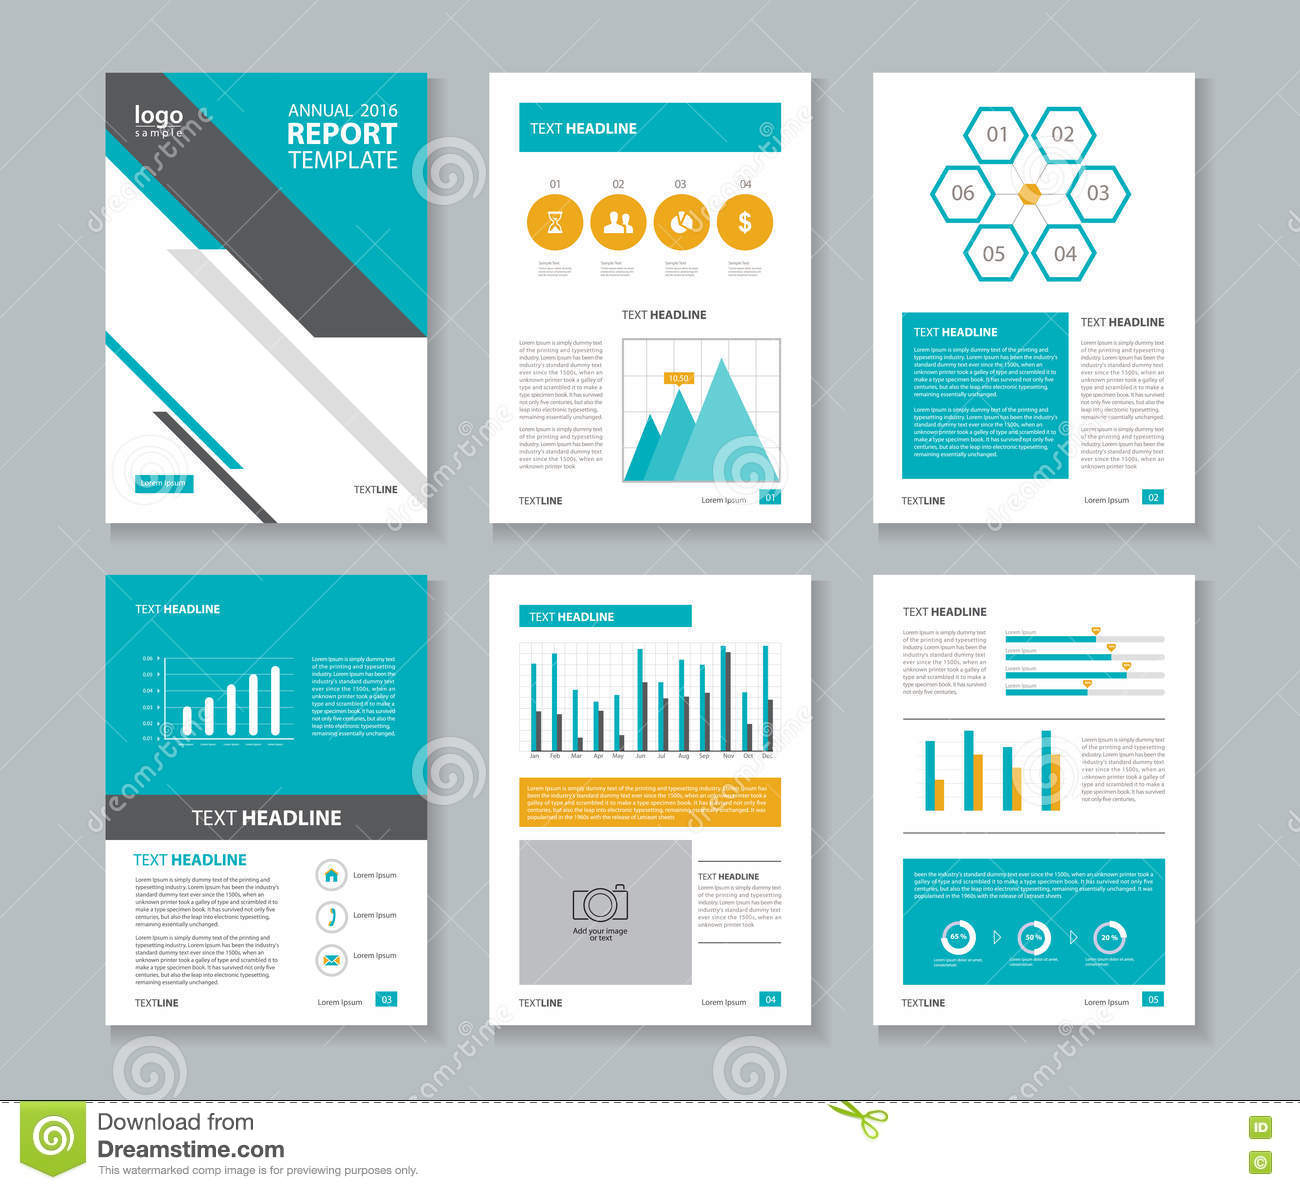 Templates For Annual Reports – All New Resume Examples Regarding Annual Report Template Word